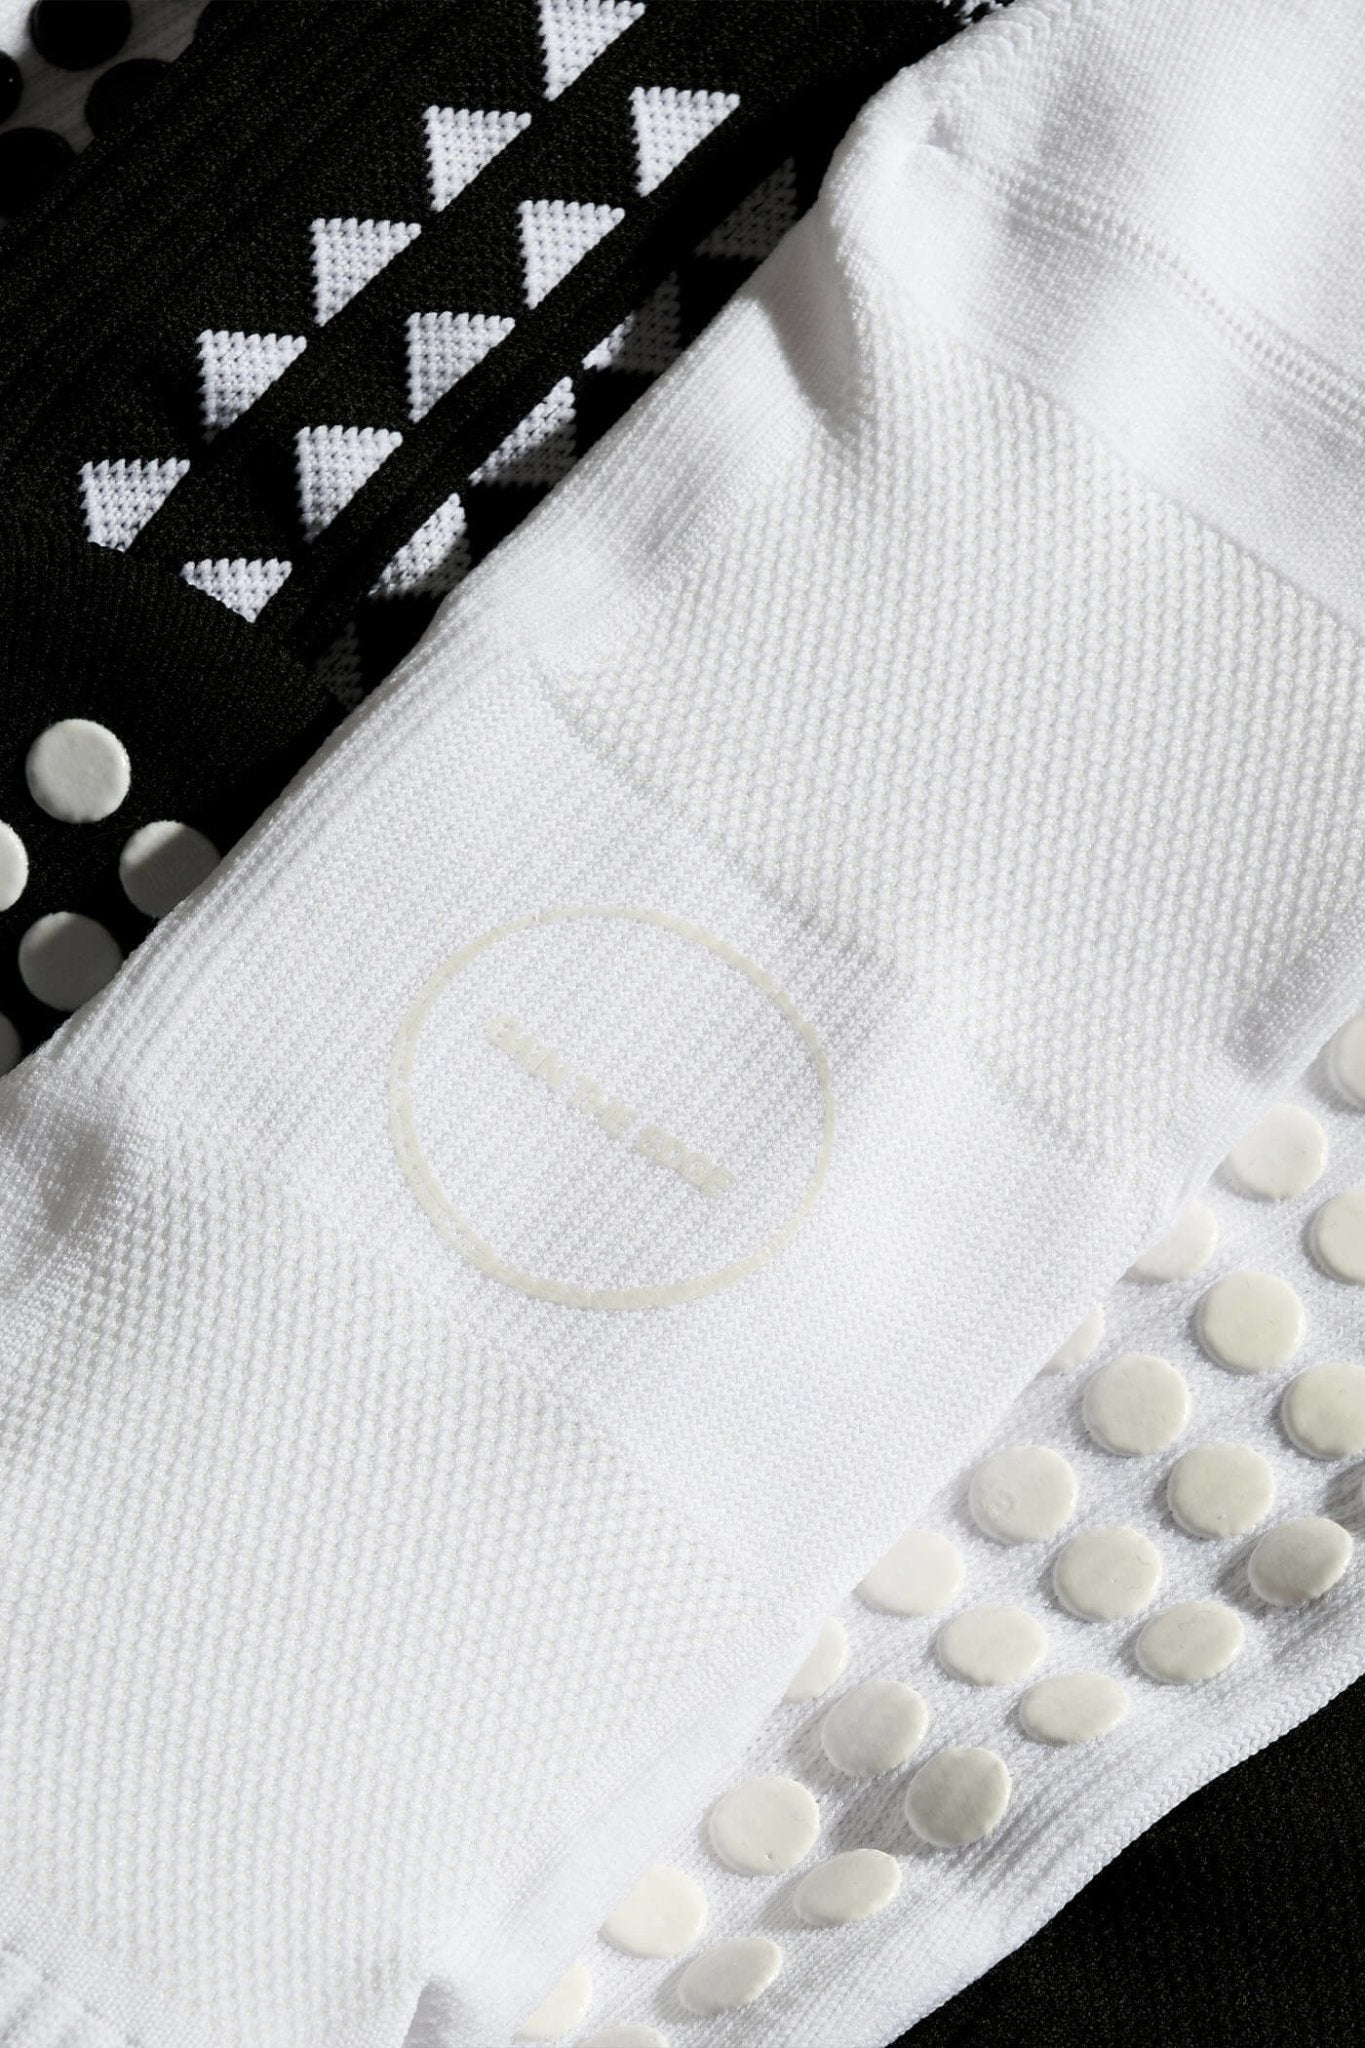 WHITEOUT LIMITED EDITION GRIP SOCKS 2.0